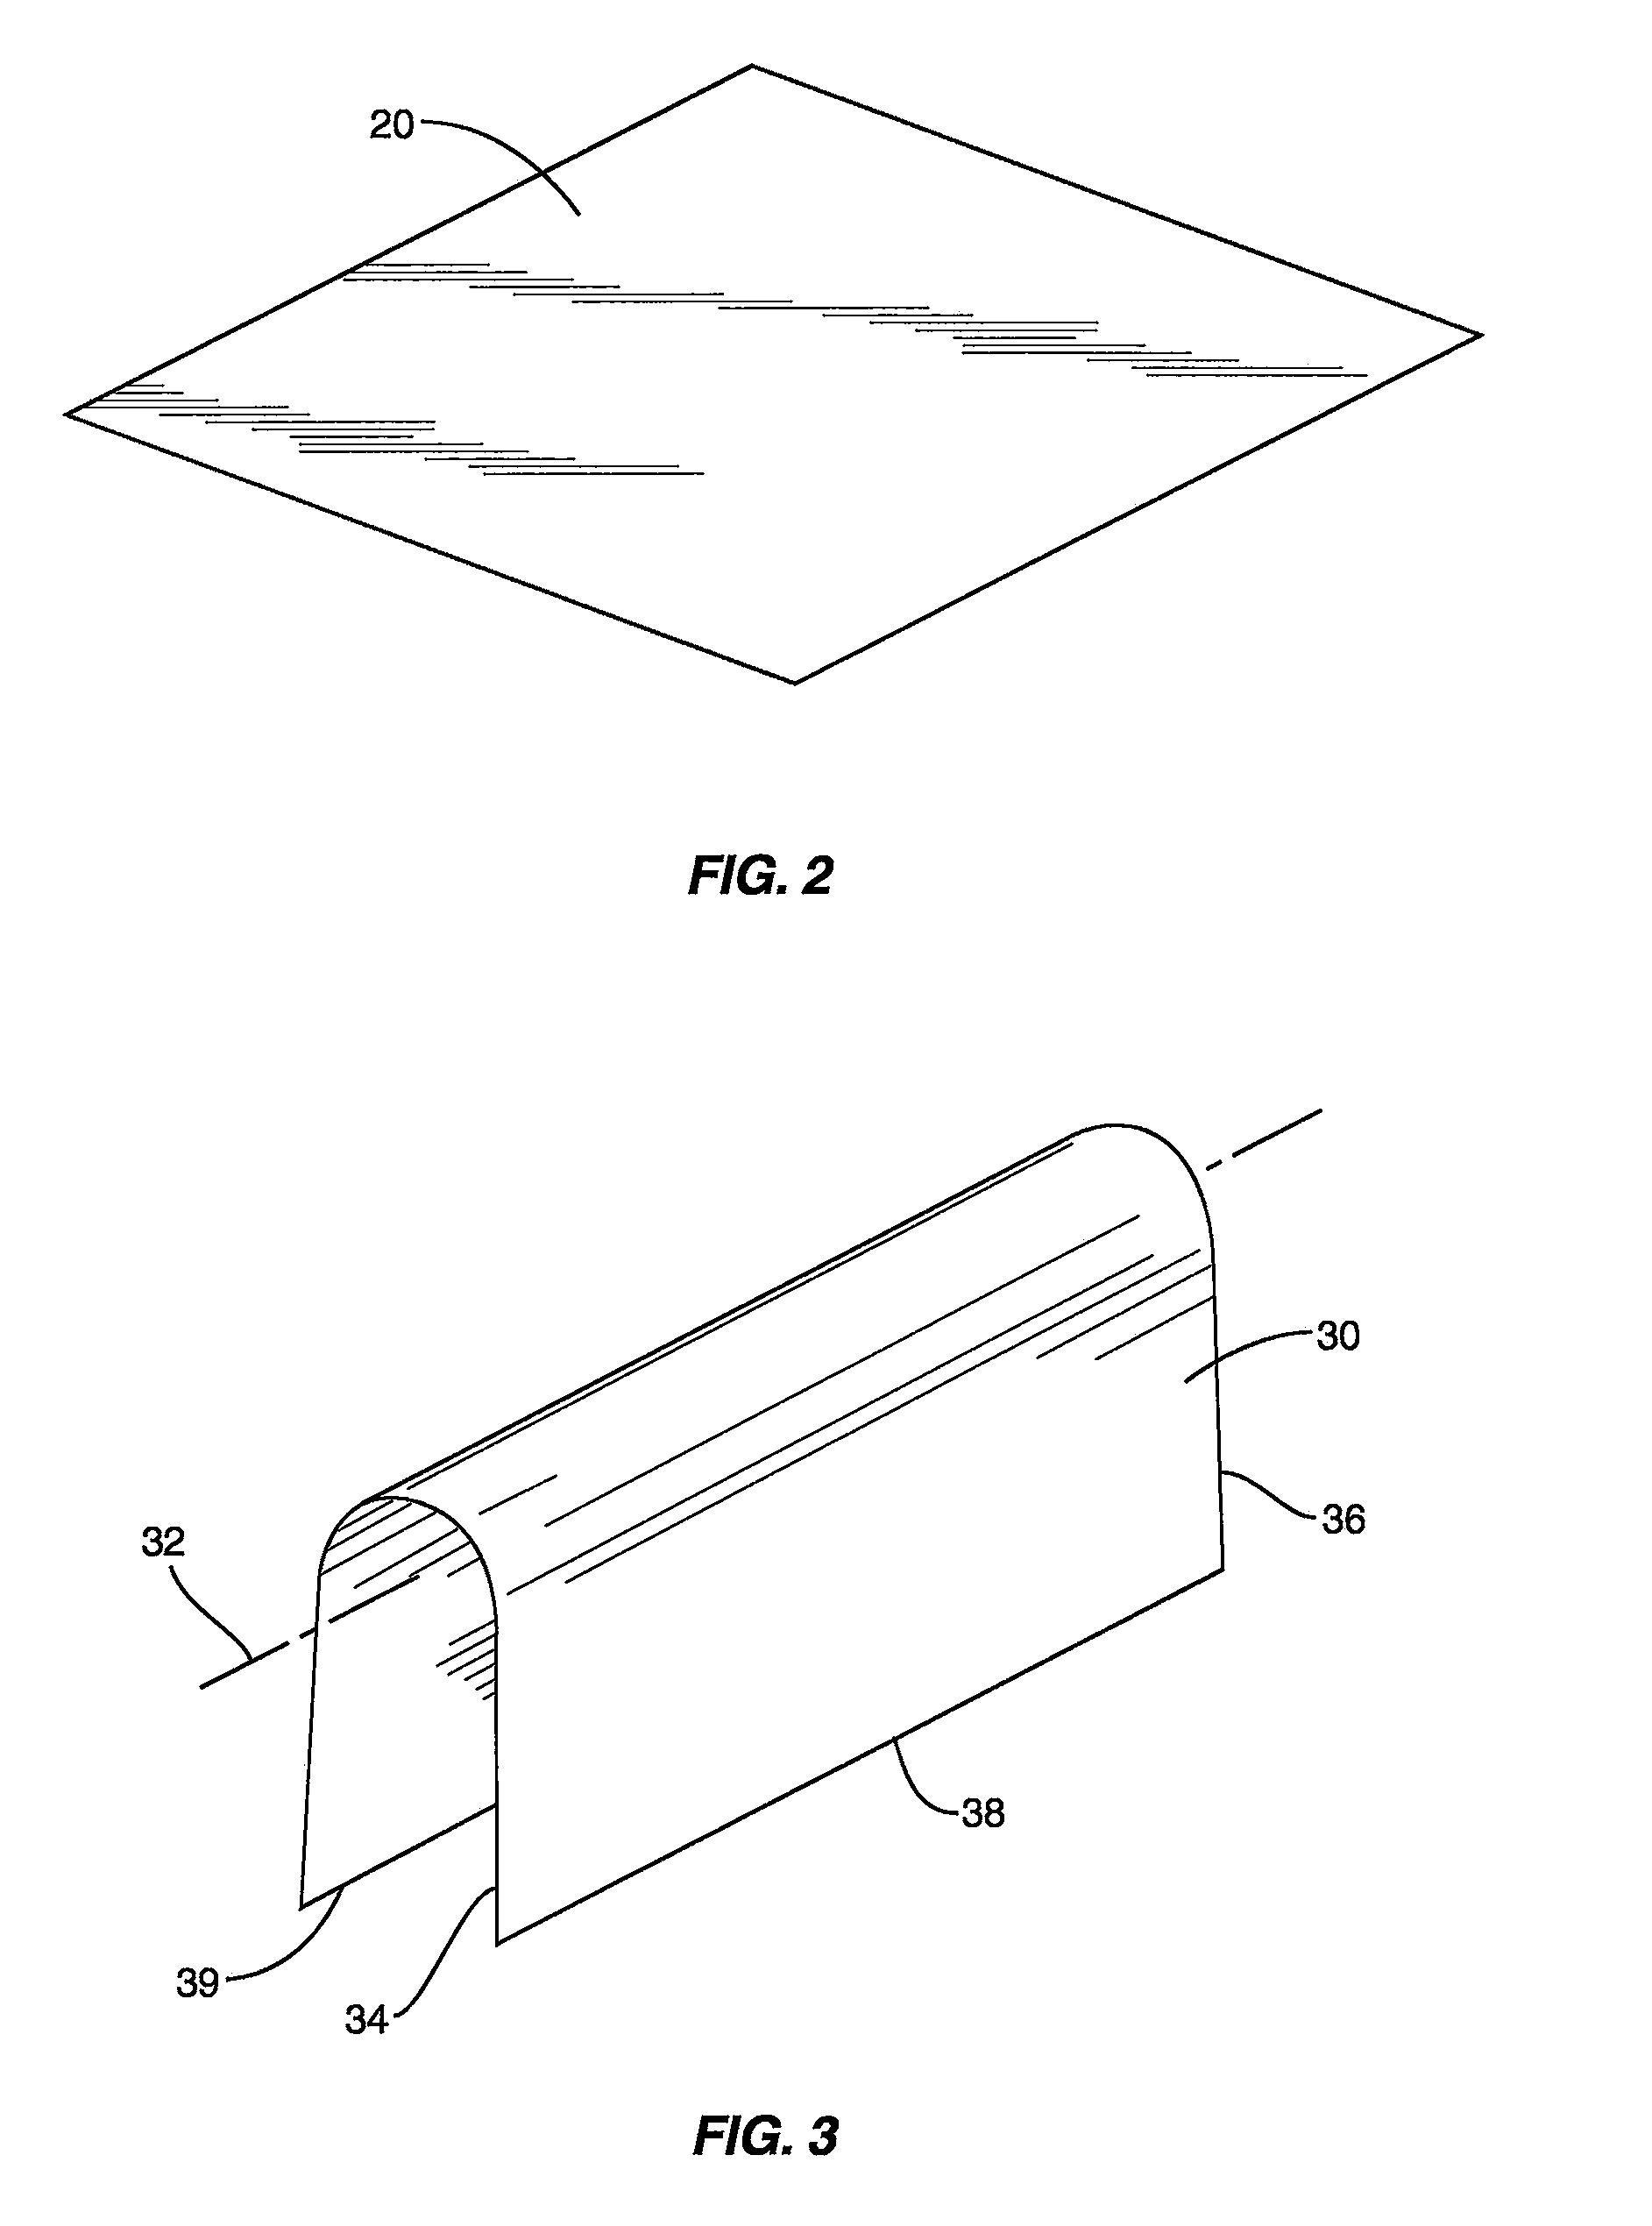 Stretch forming method for a sheet metal skin segment having compound curvatures